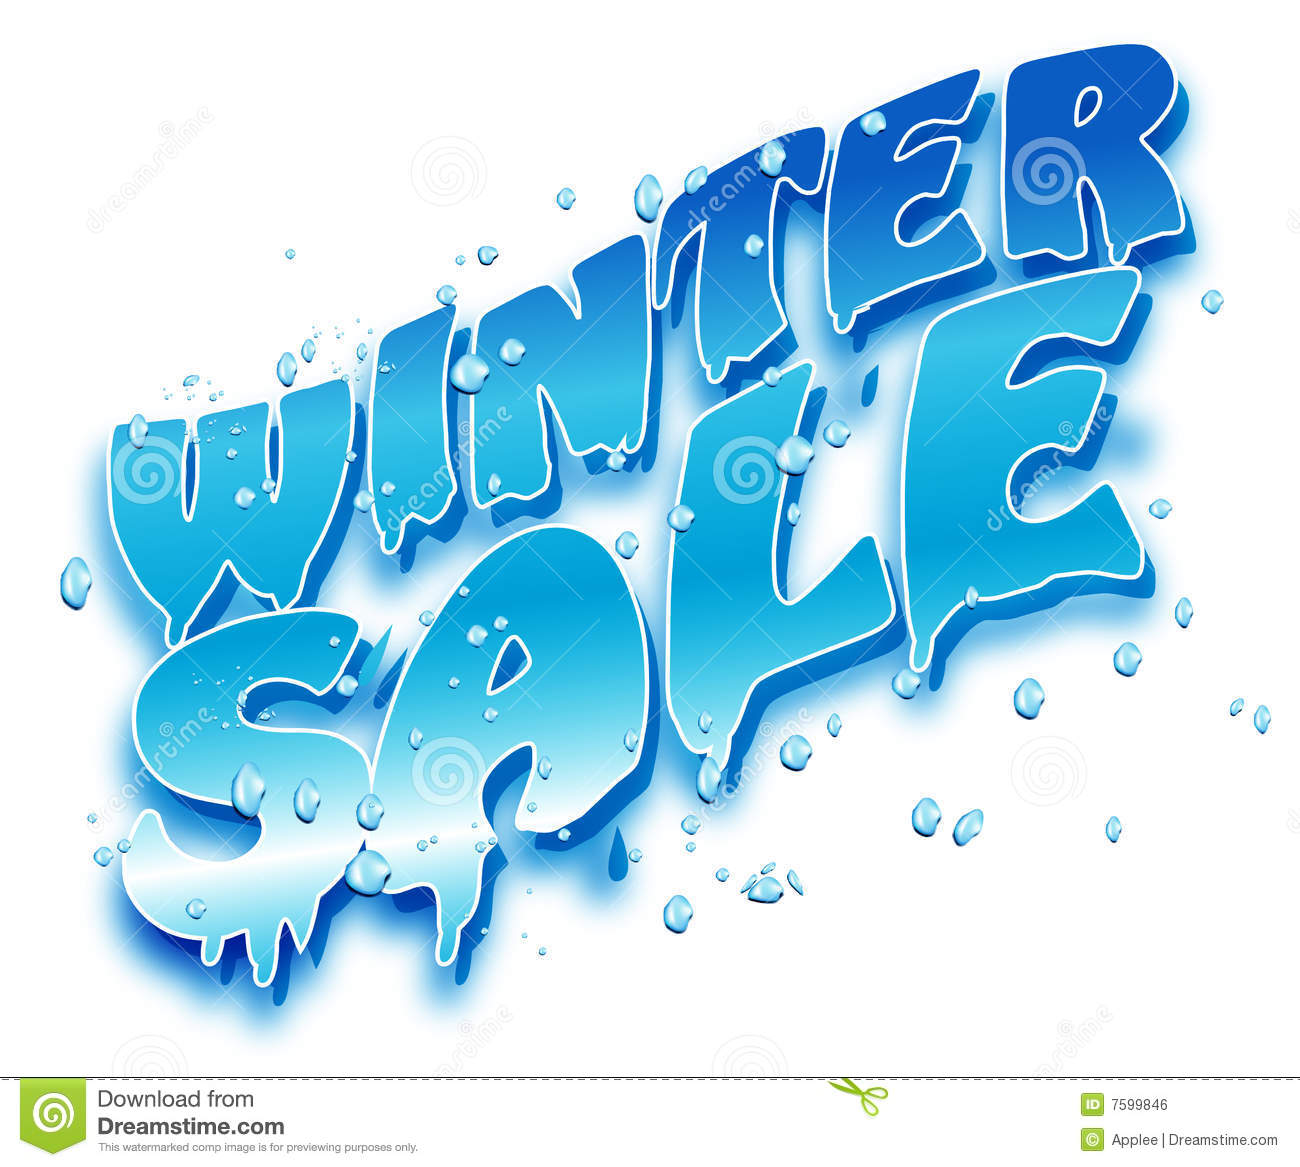 Winter Sale Royalty Free Stock Image   Image  7599846